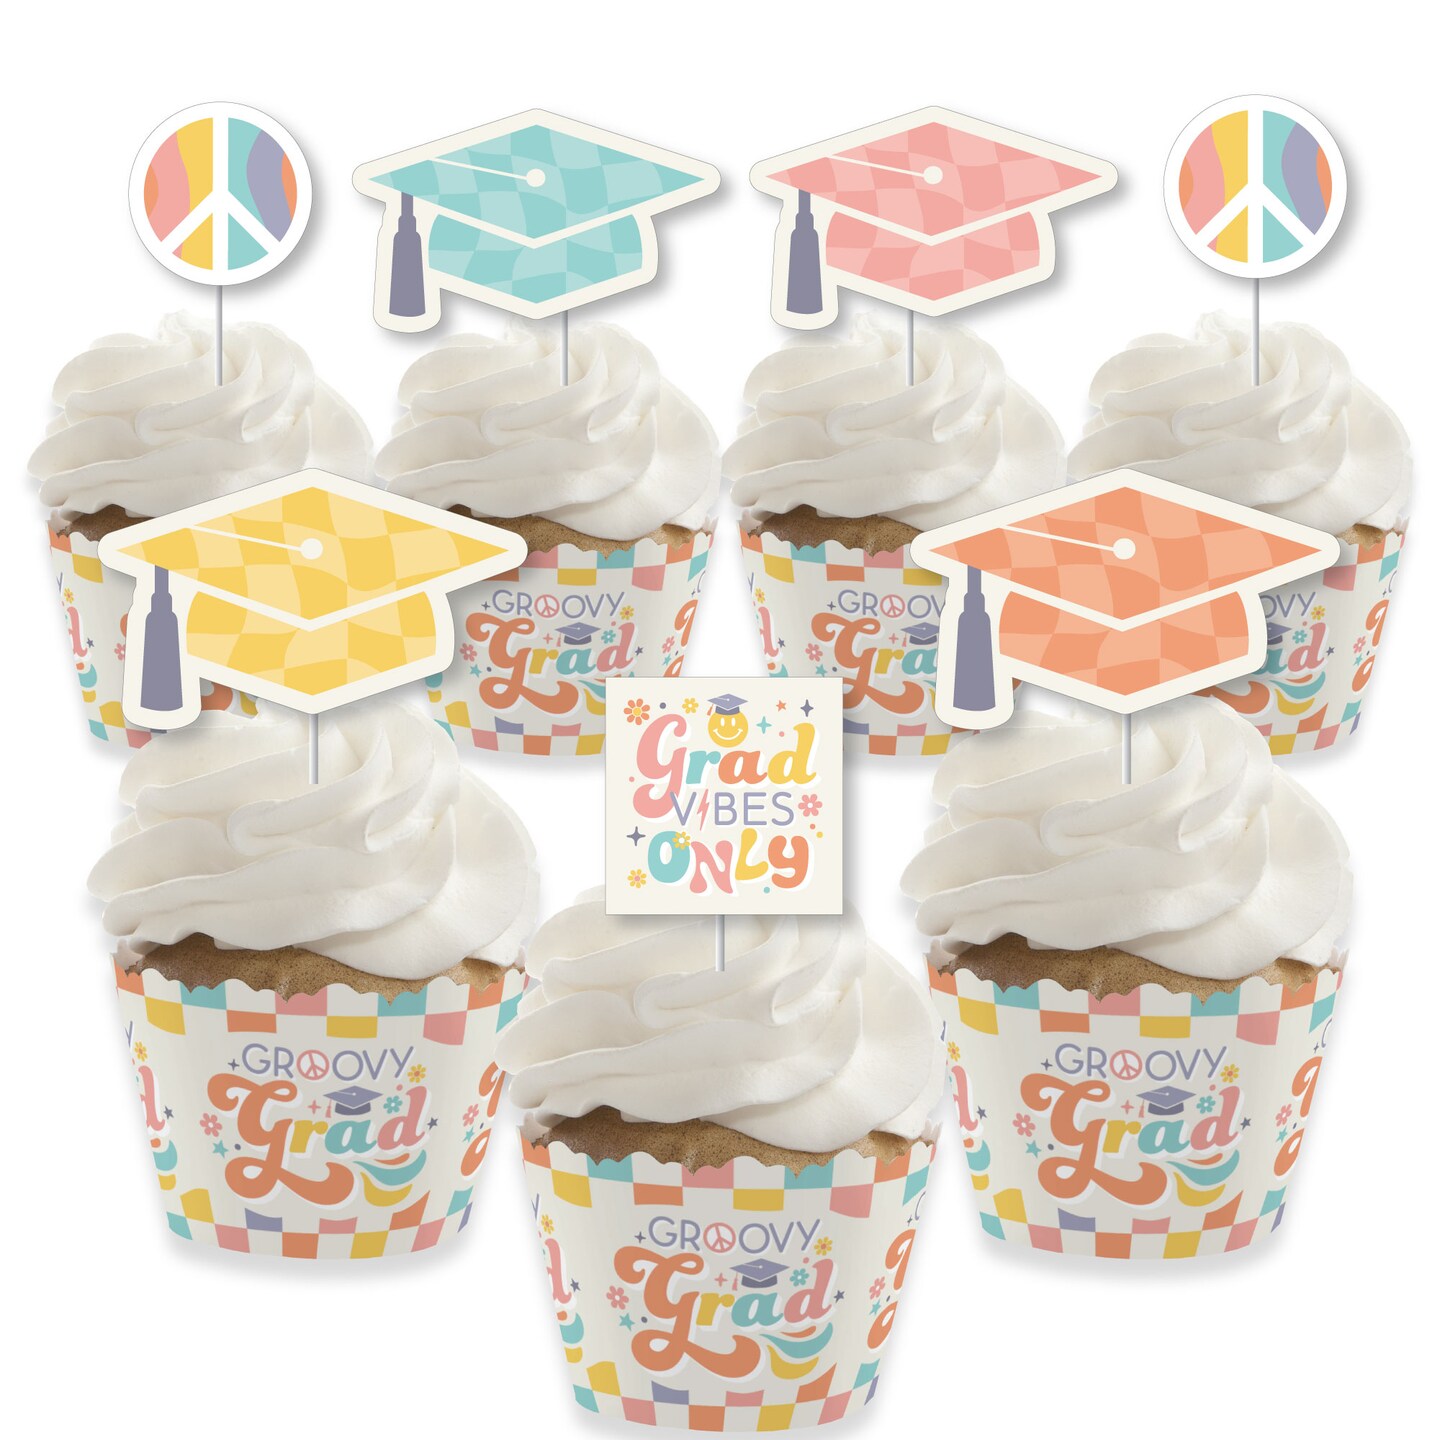 Big Dot of Happiness Groovy Grad - Cupcake Decoration - Hippie Graduation Party Cupcake Wrappers and Treat Picks Kit - Set of 24